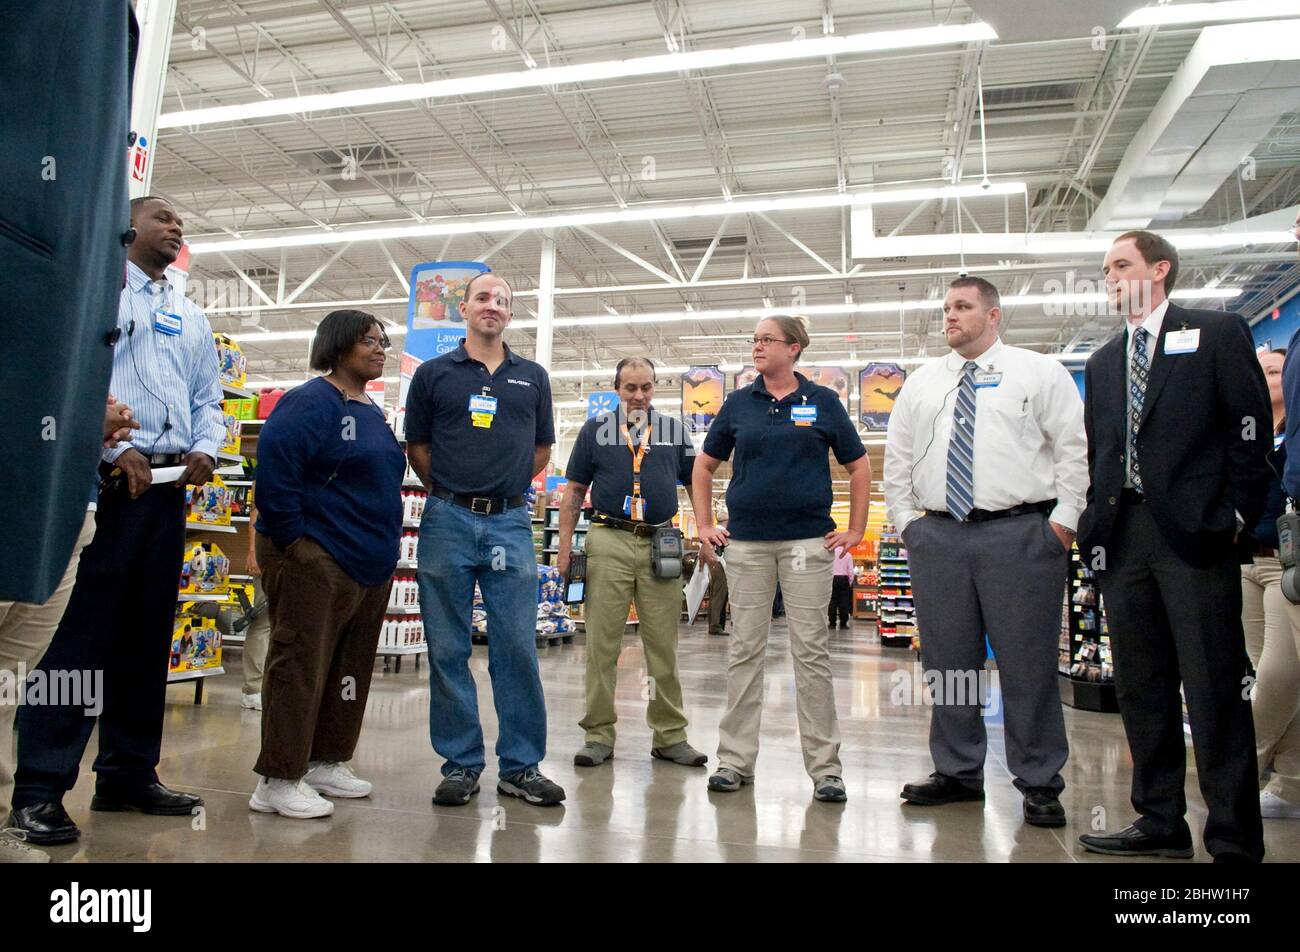 Austin, Texas October 26, 2010: Multi-ethnic group of Walmart employees and managers during informal staff meeting/ pep talk before opening of new Walmart store. ©Marjorie Kamys Cotera/Daemmrich Photography Stock Photo